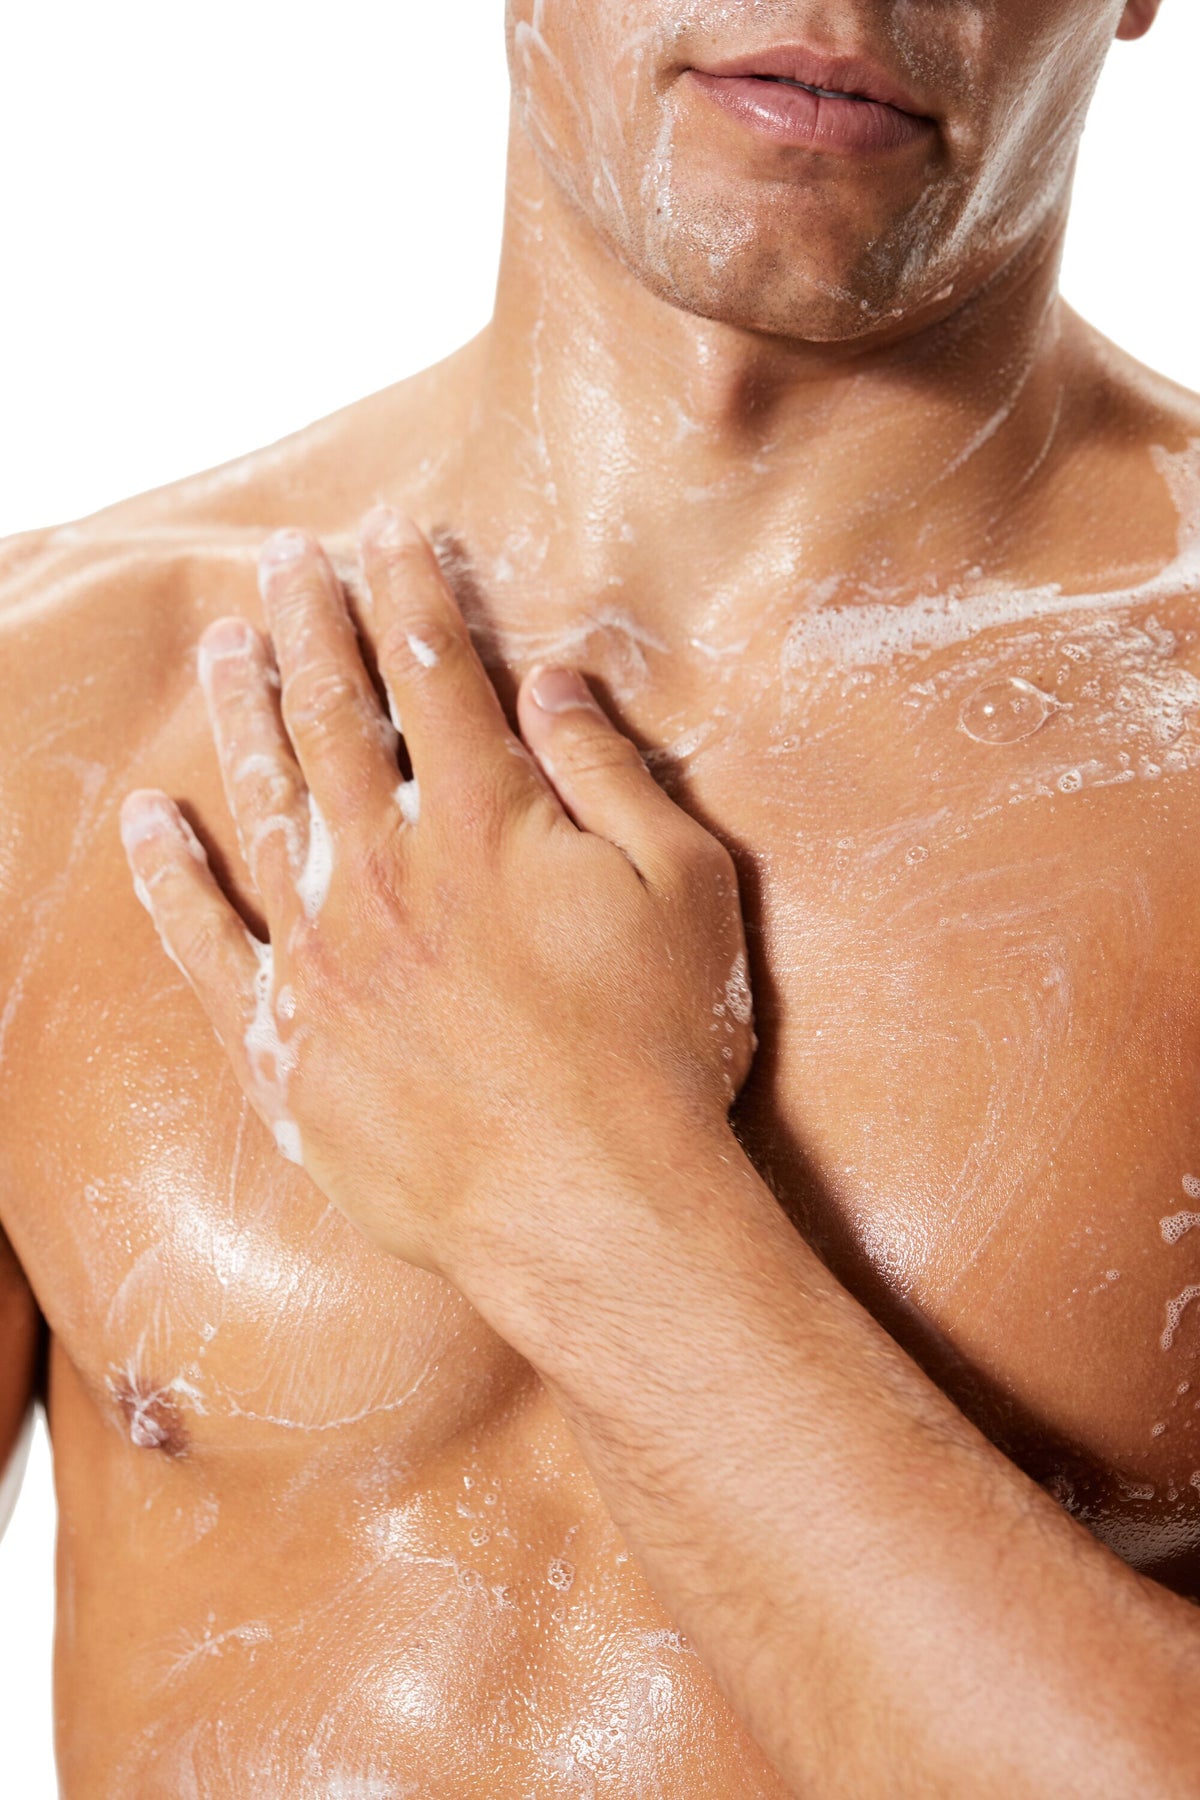 A man washing his body using the Alo Glow System.